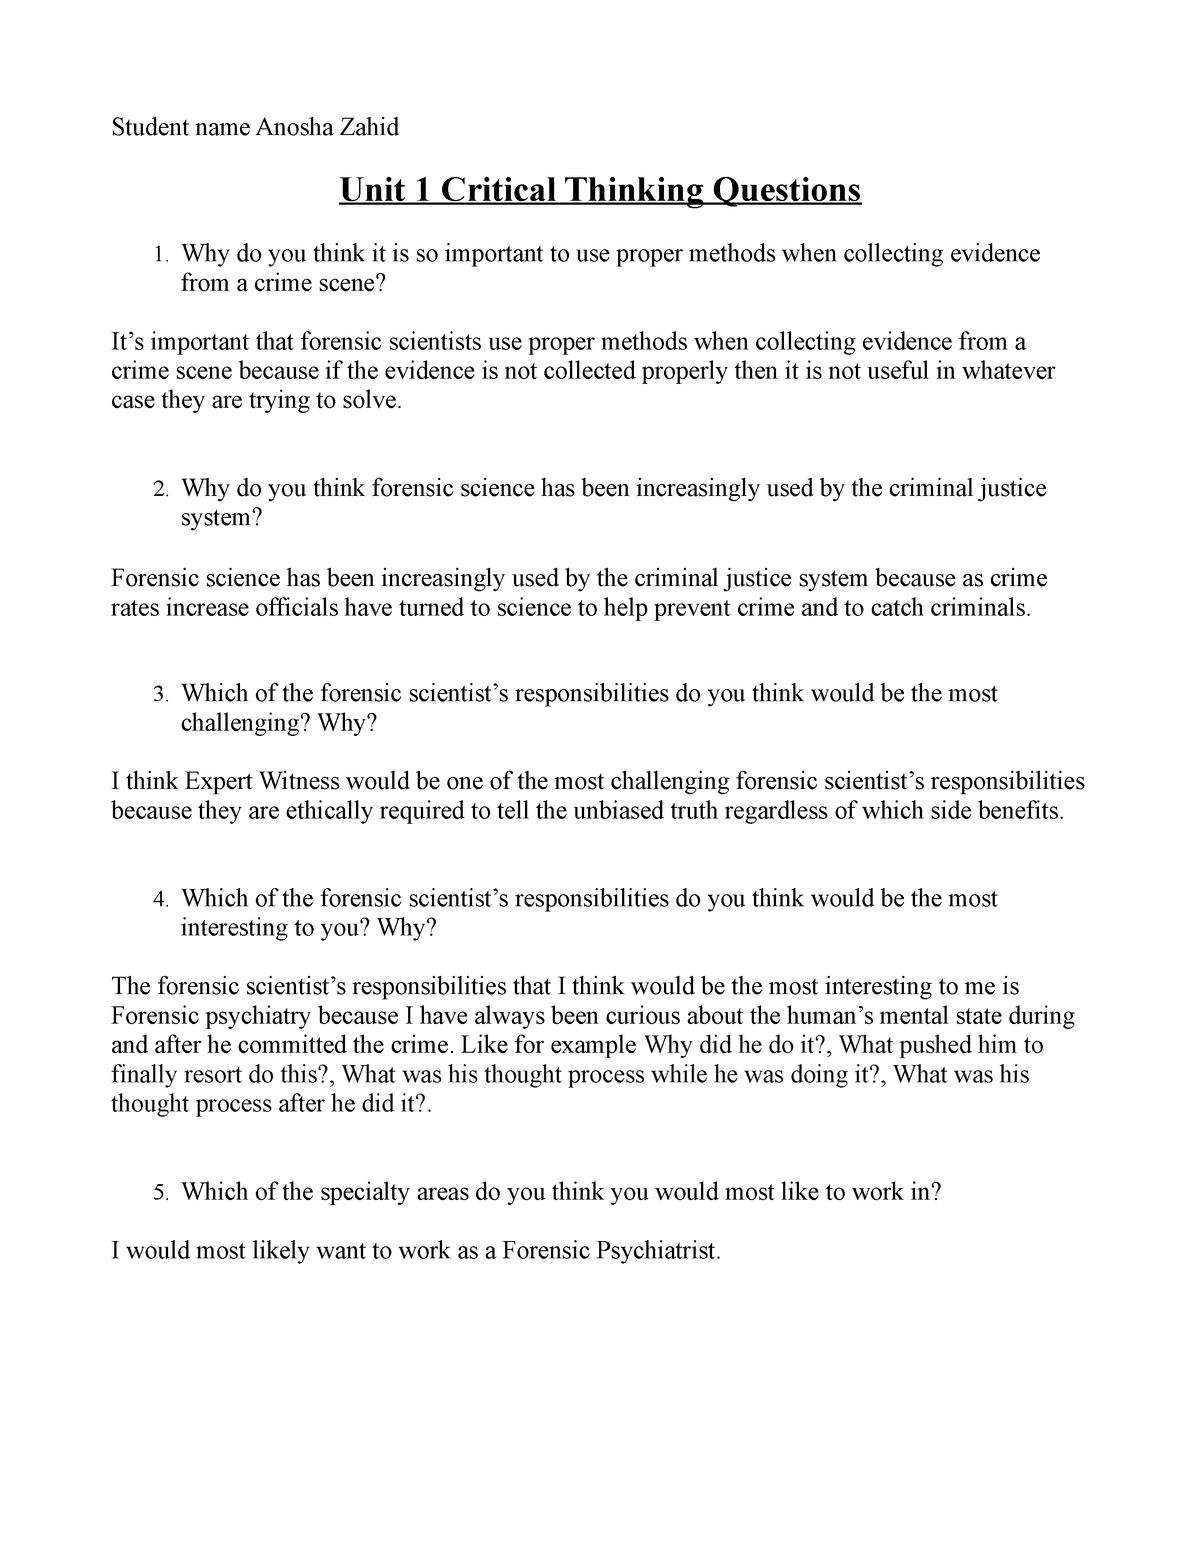 critical thinking questions article